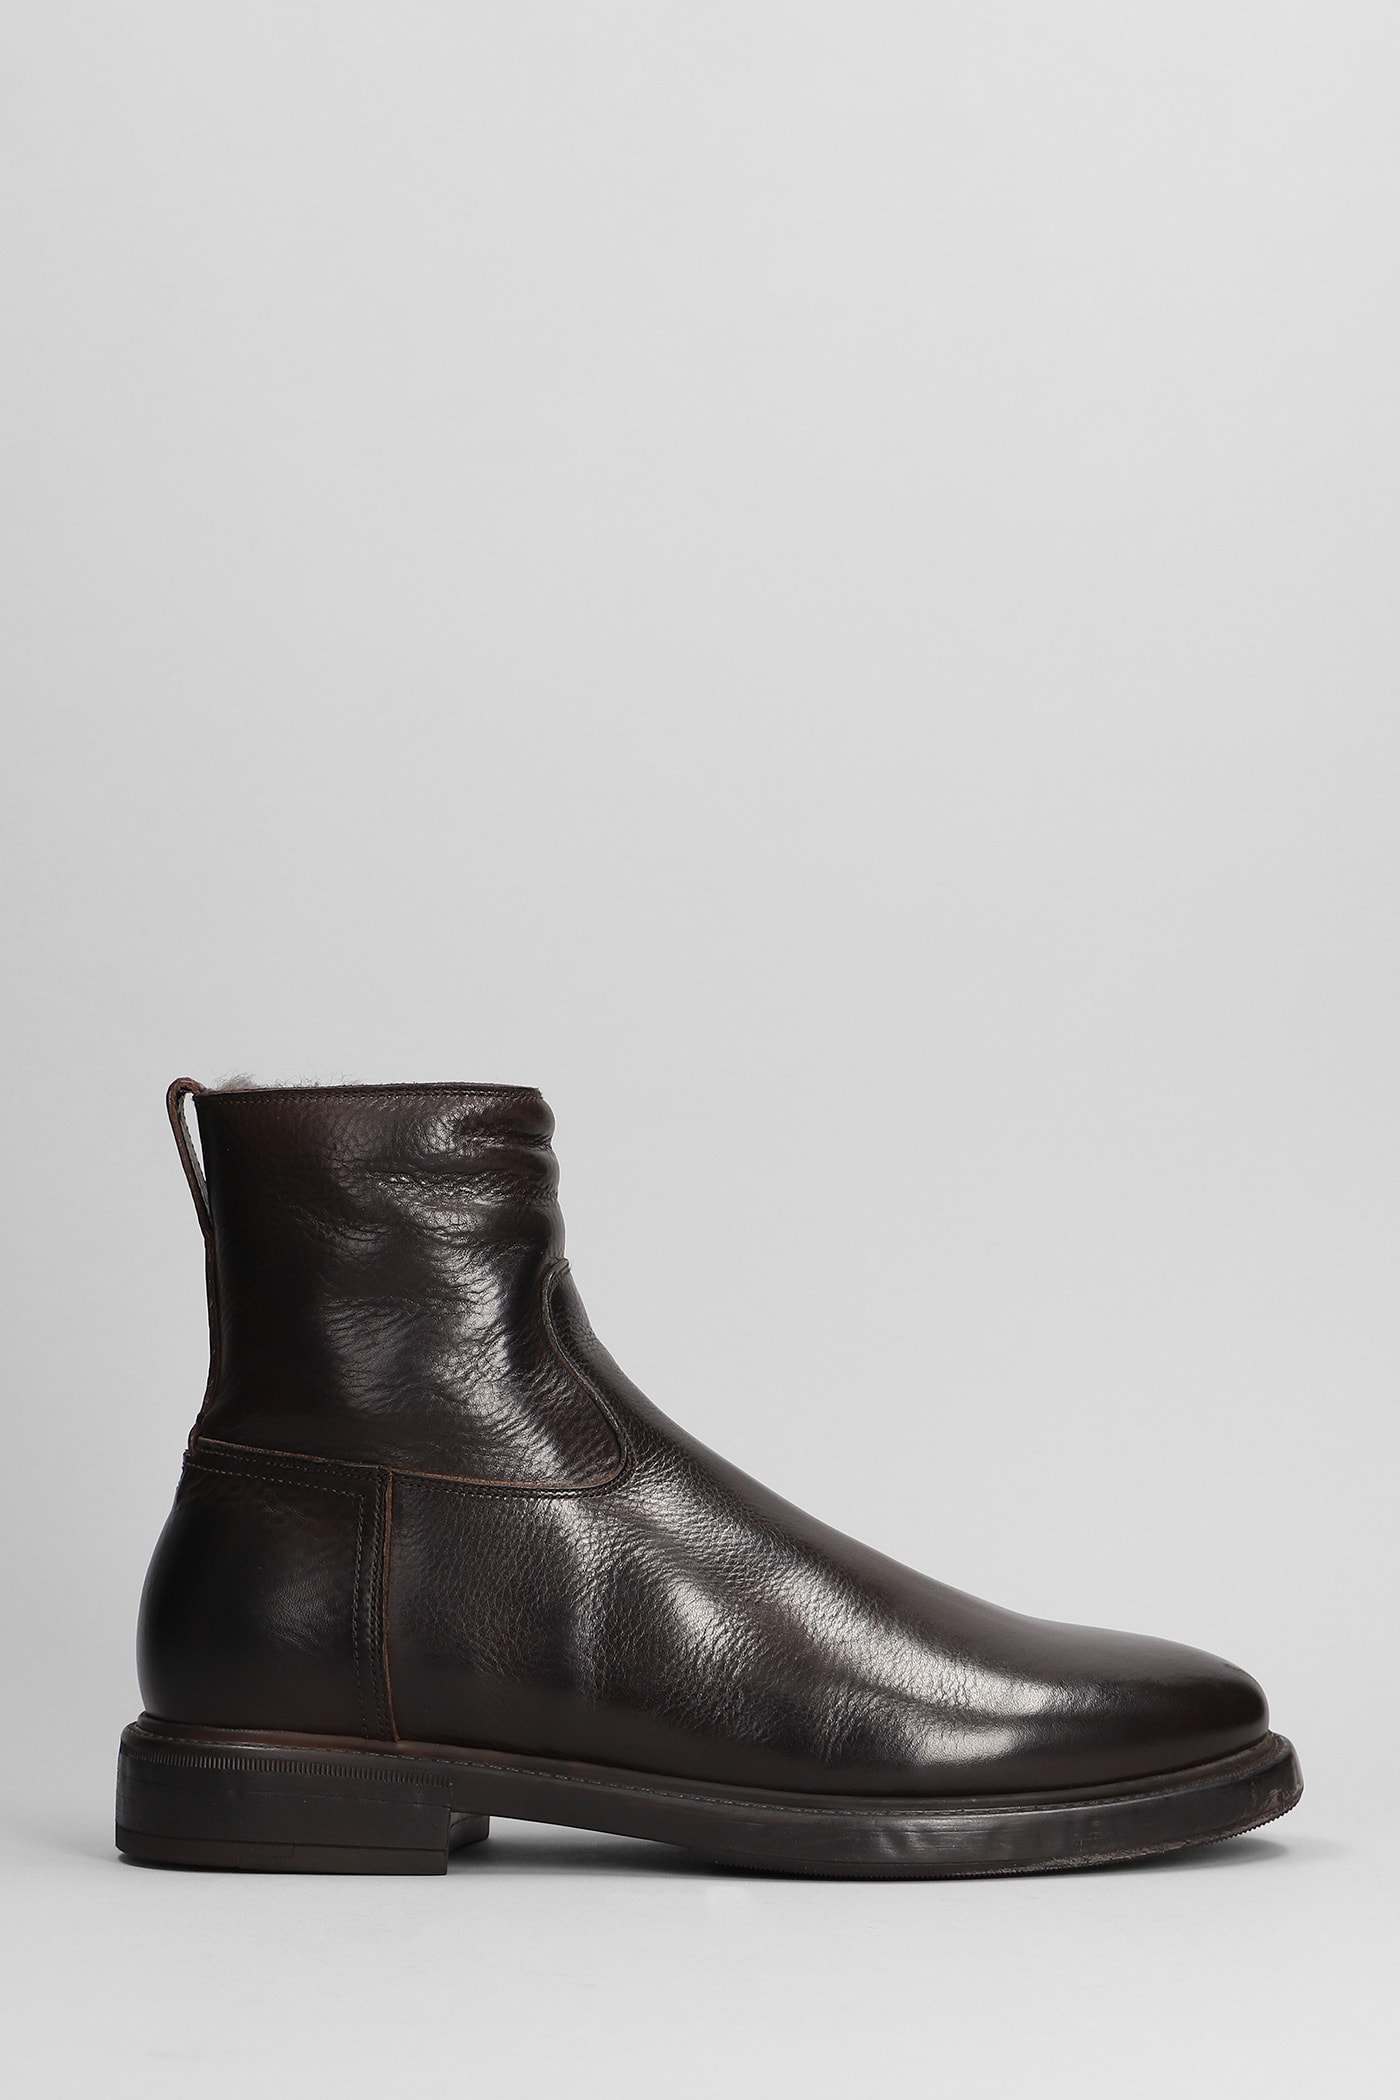 Shop Silvano Sassetti Low Heels Ankle Boots In Dark Brown Leather